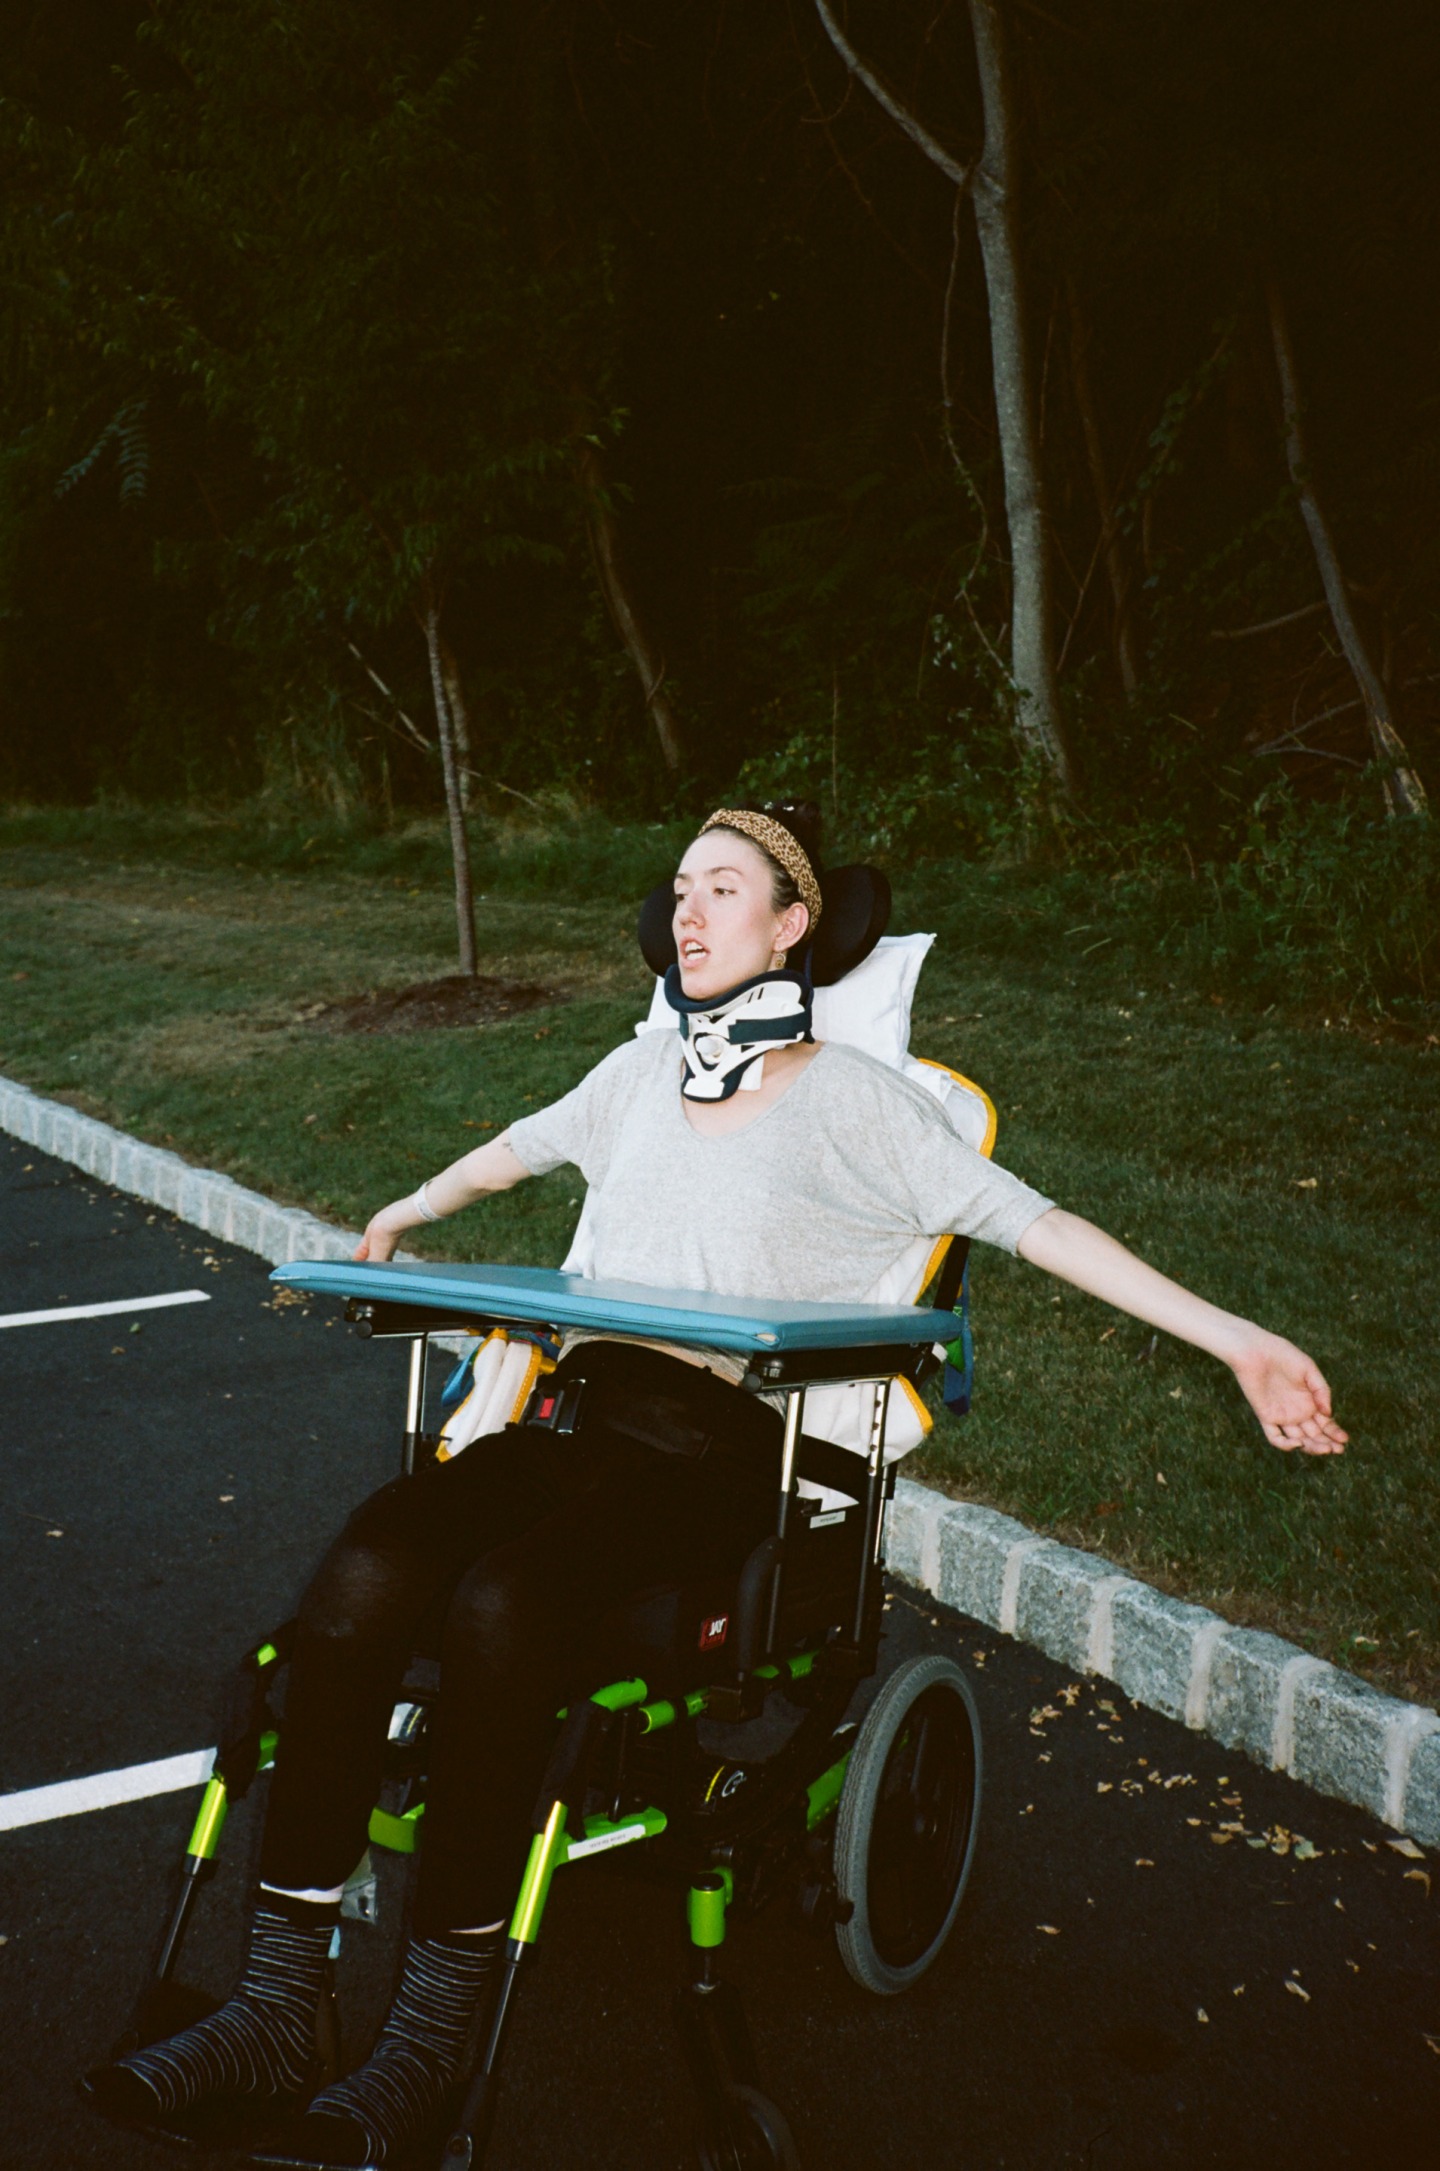 A Freak Accident Paralyzed My Best Friend. Now She’s Using Art To Get Her Life Back.